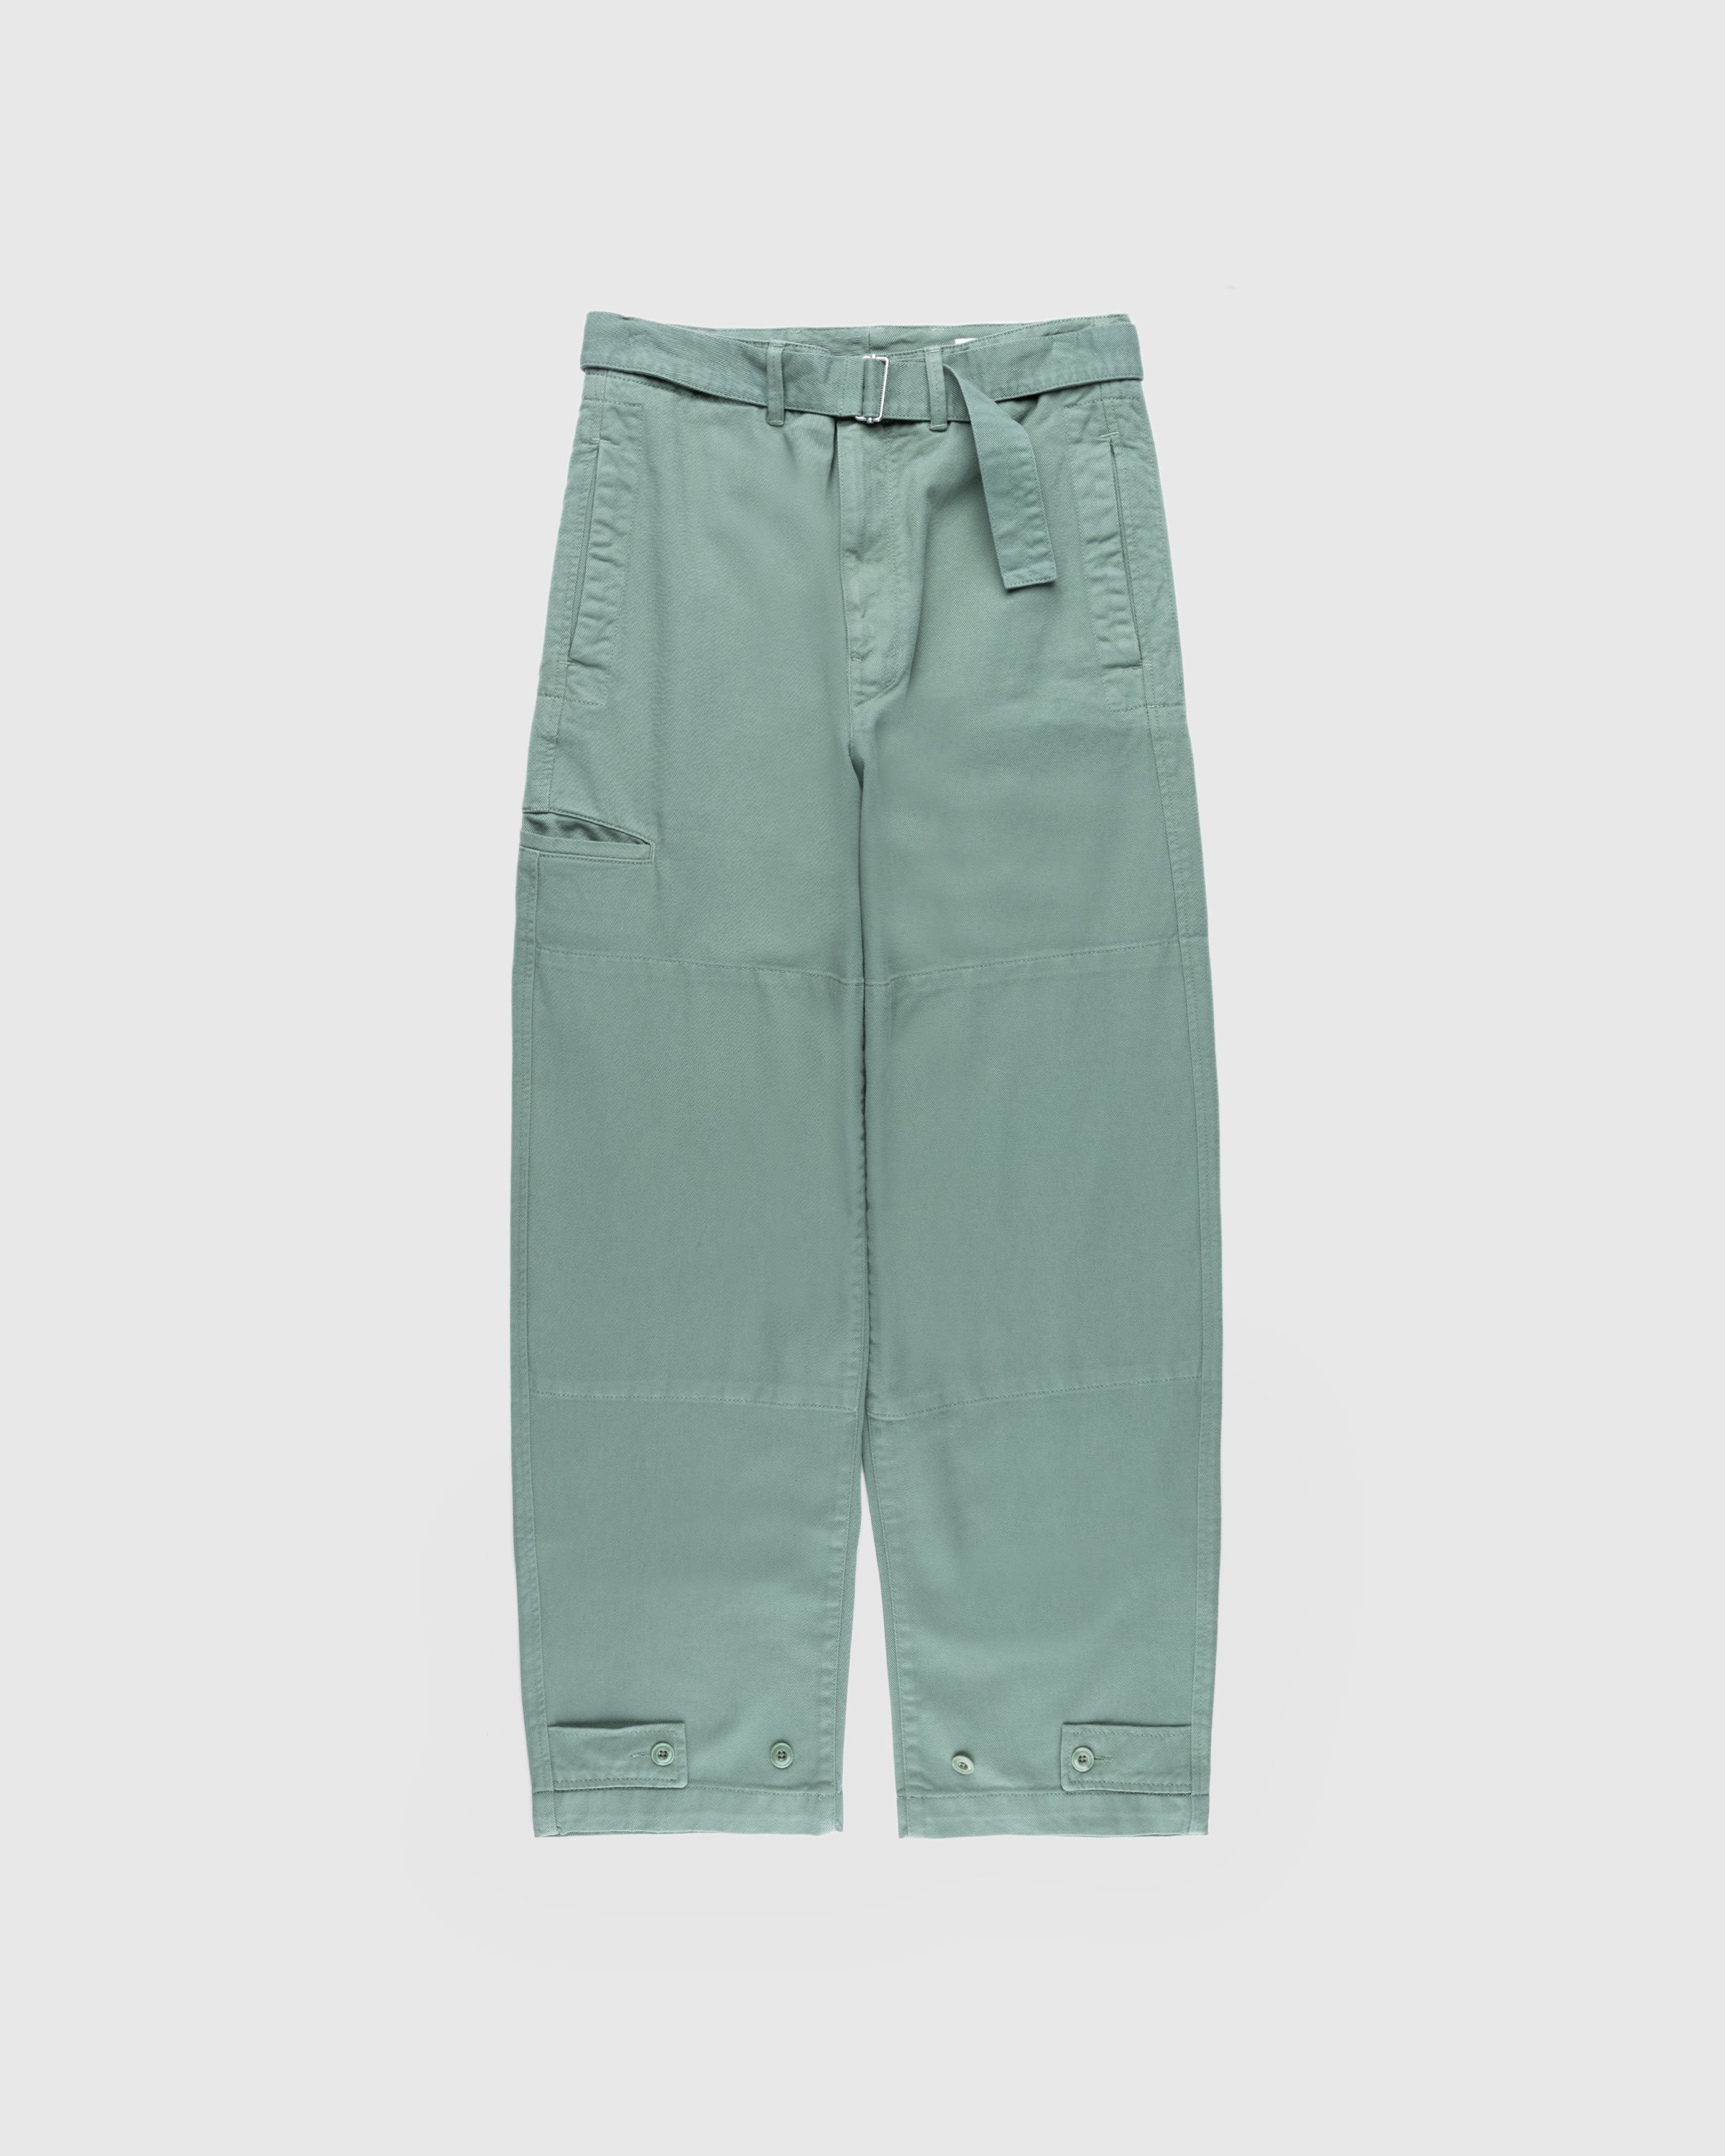 Lemaire - MILITARY PANTS - Clothing - Green - Image 1